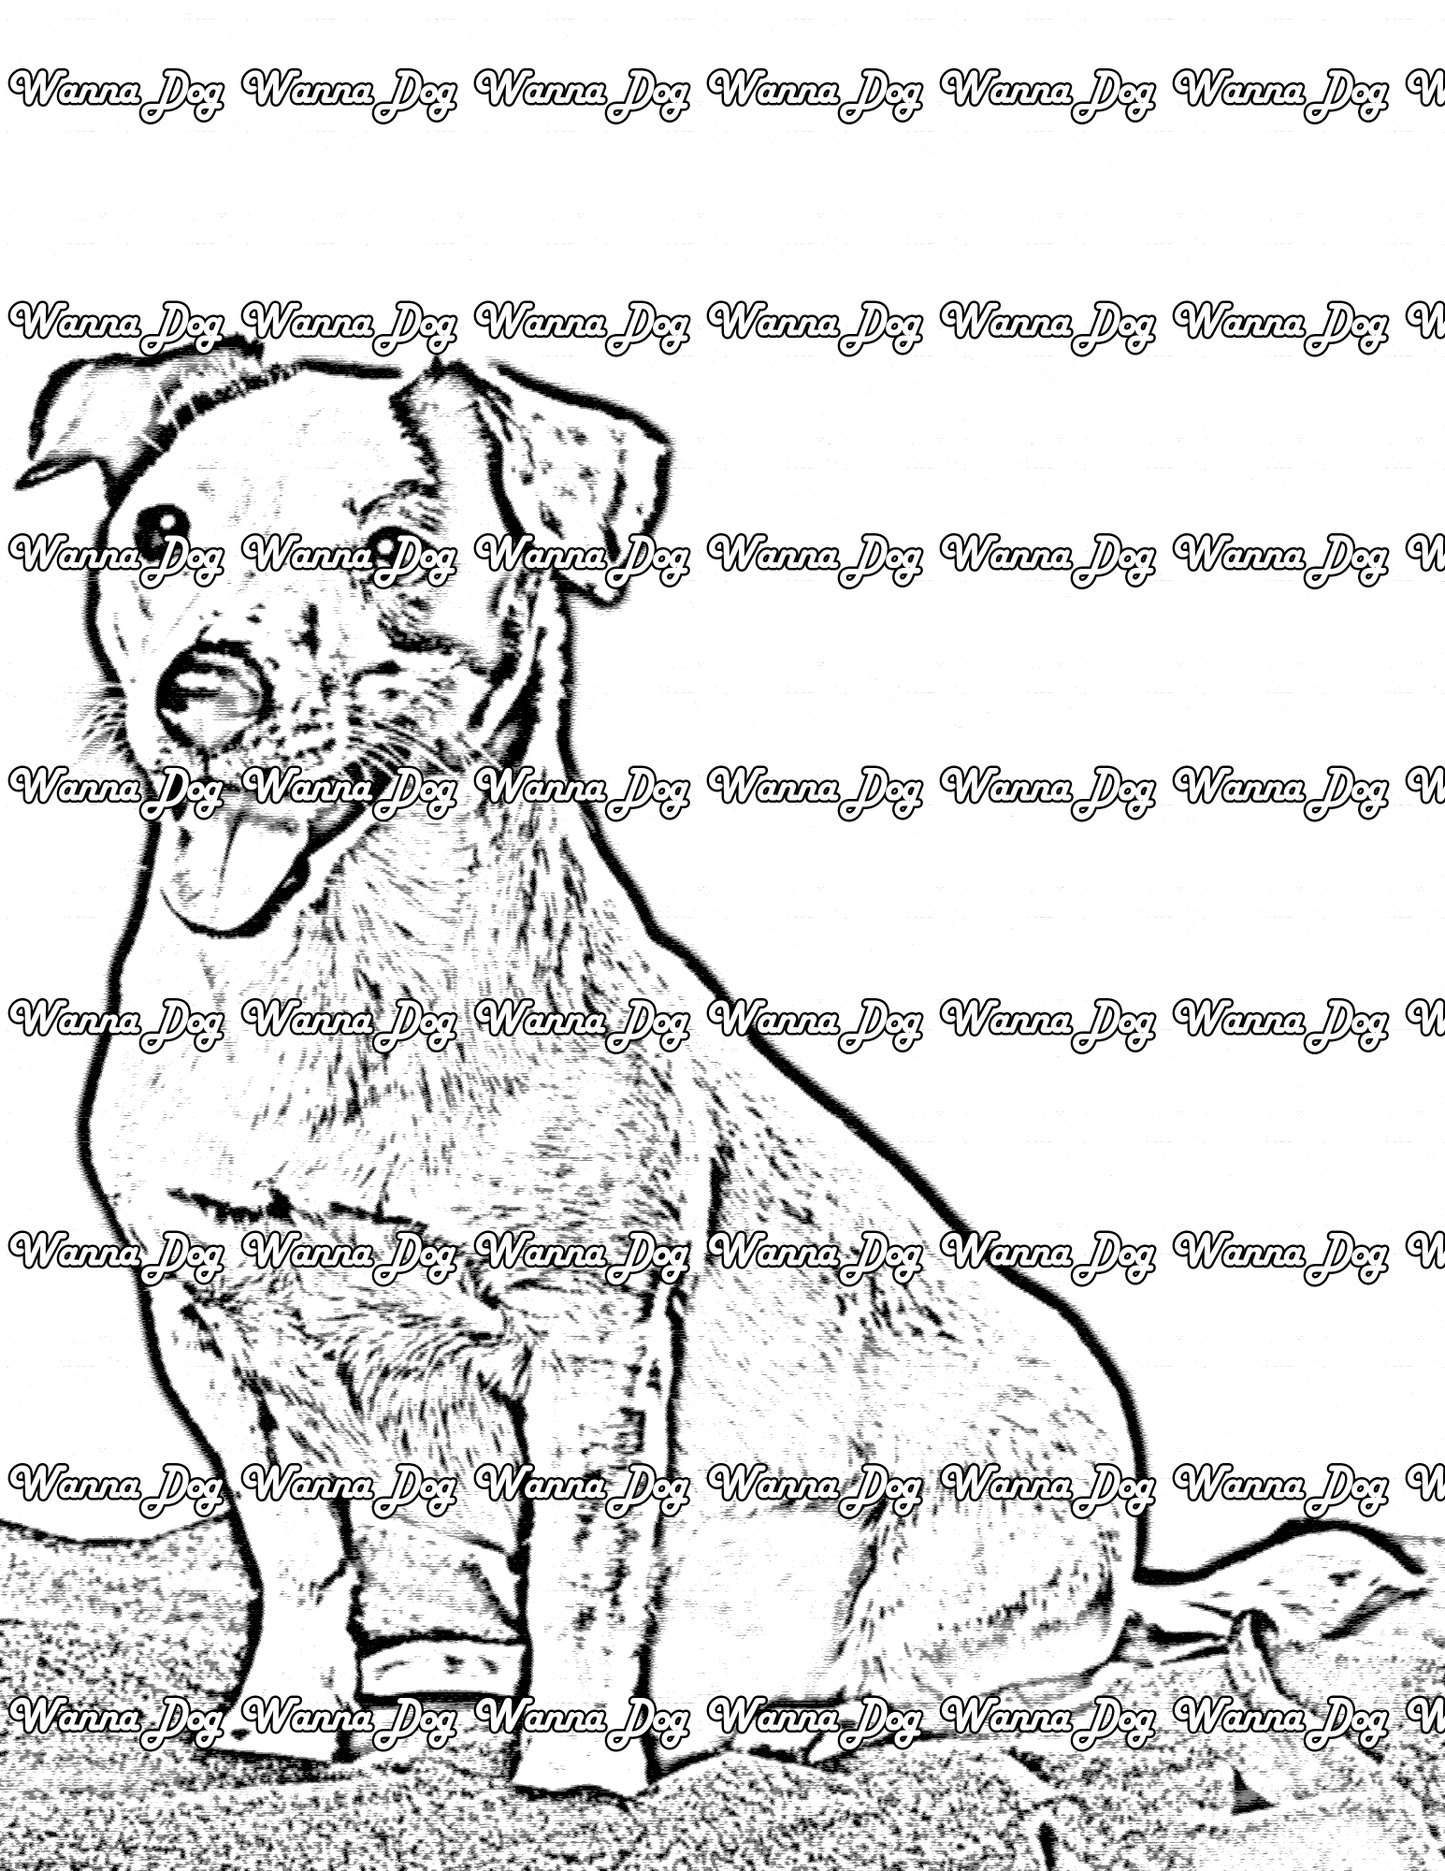 Jack Russell Terrier Coloring Page of a Jack Russell Terrier sitting with their tongue out